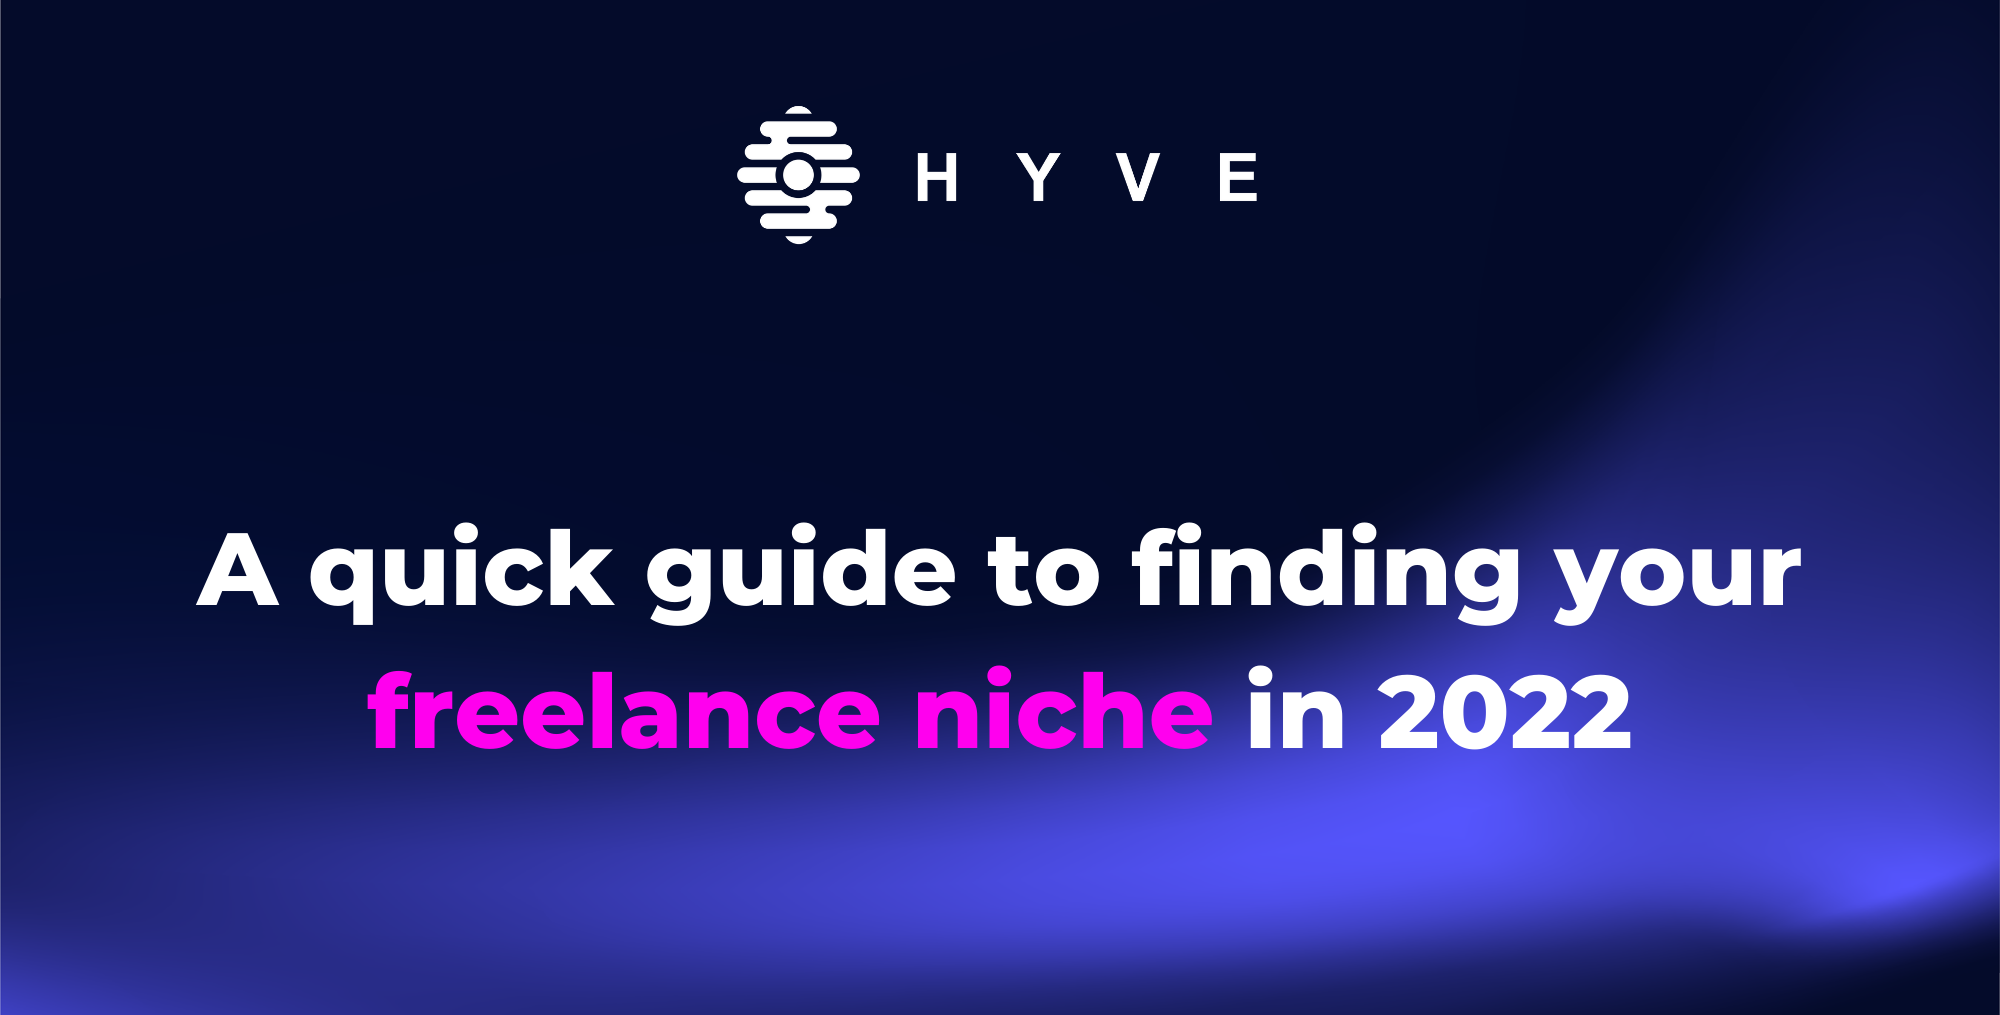 A quick guide to finding your freelance niche in 2022